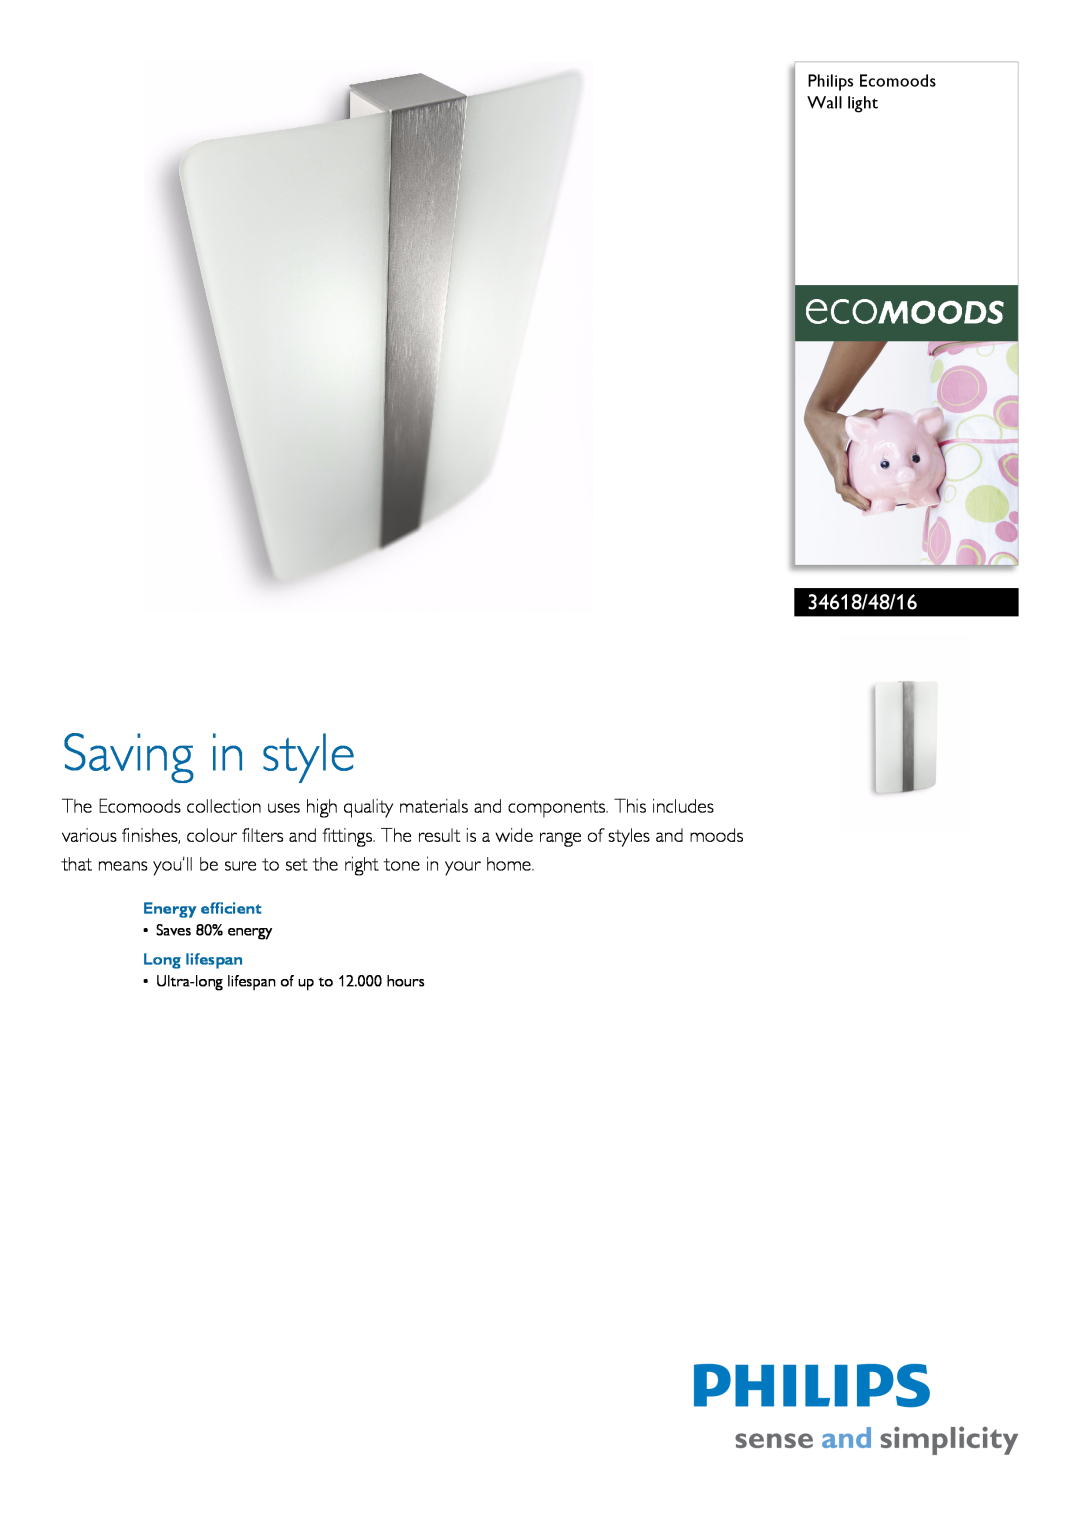 Philips 34618/48/16 manual Philips Ecomoods Wall light, Energy efficient, Long lifespan, Saving in style, Saves 80% energy 